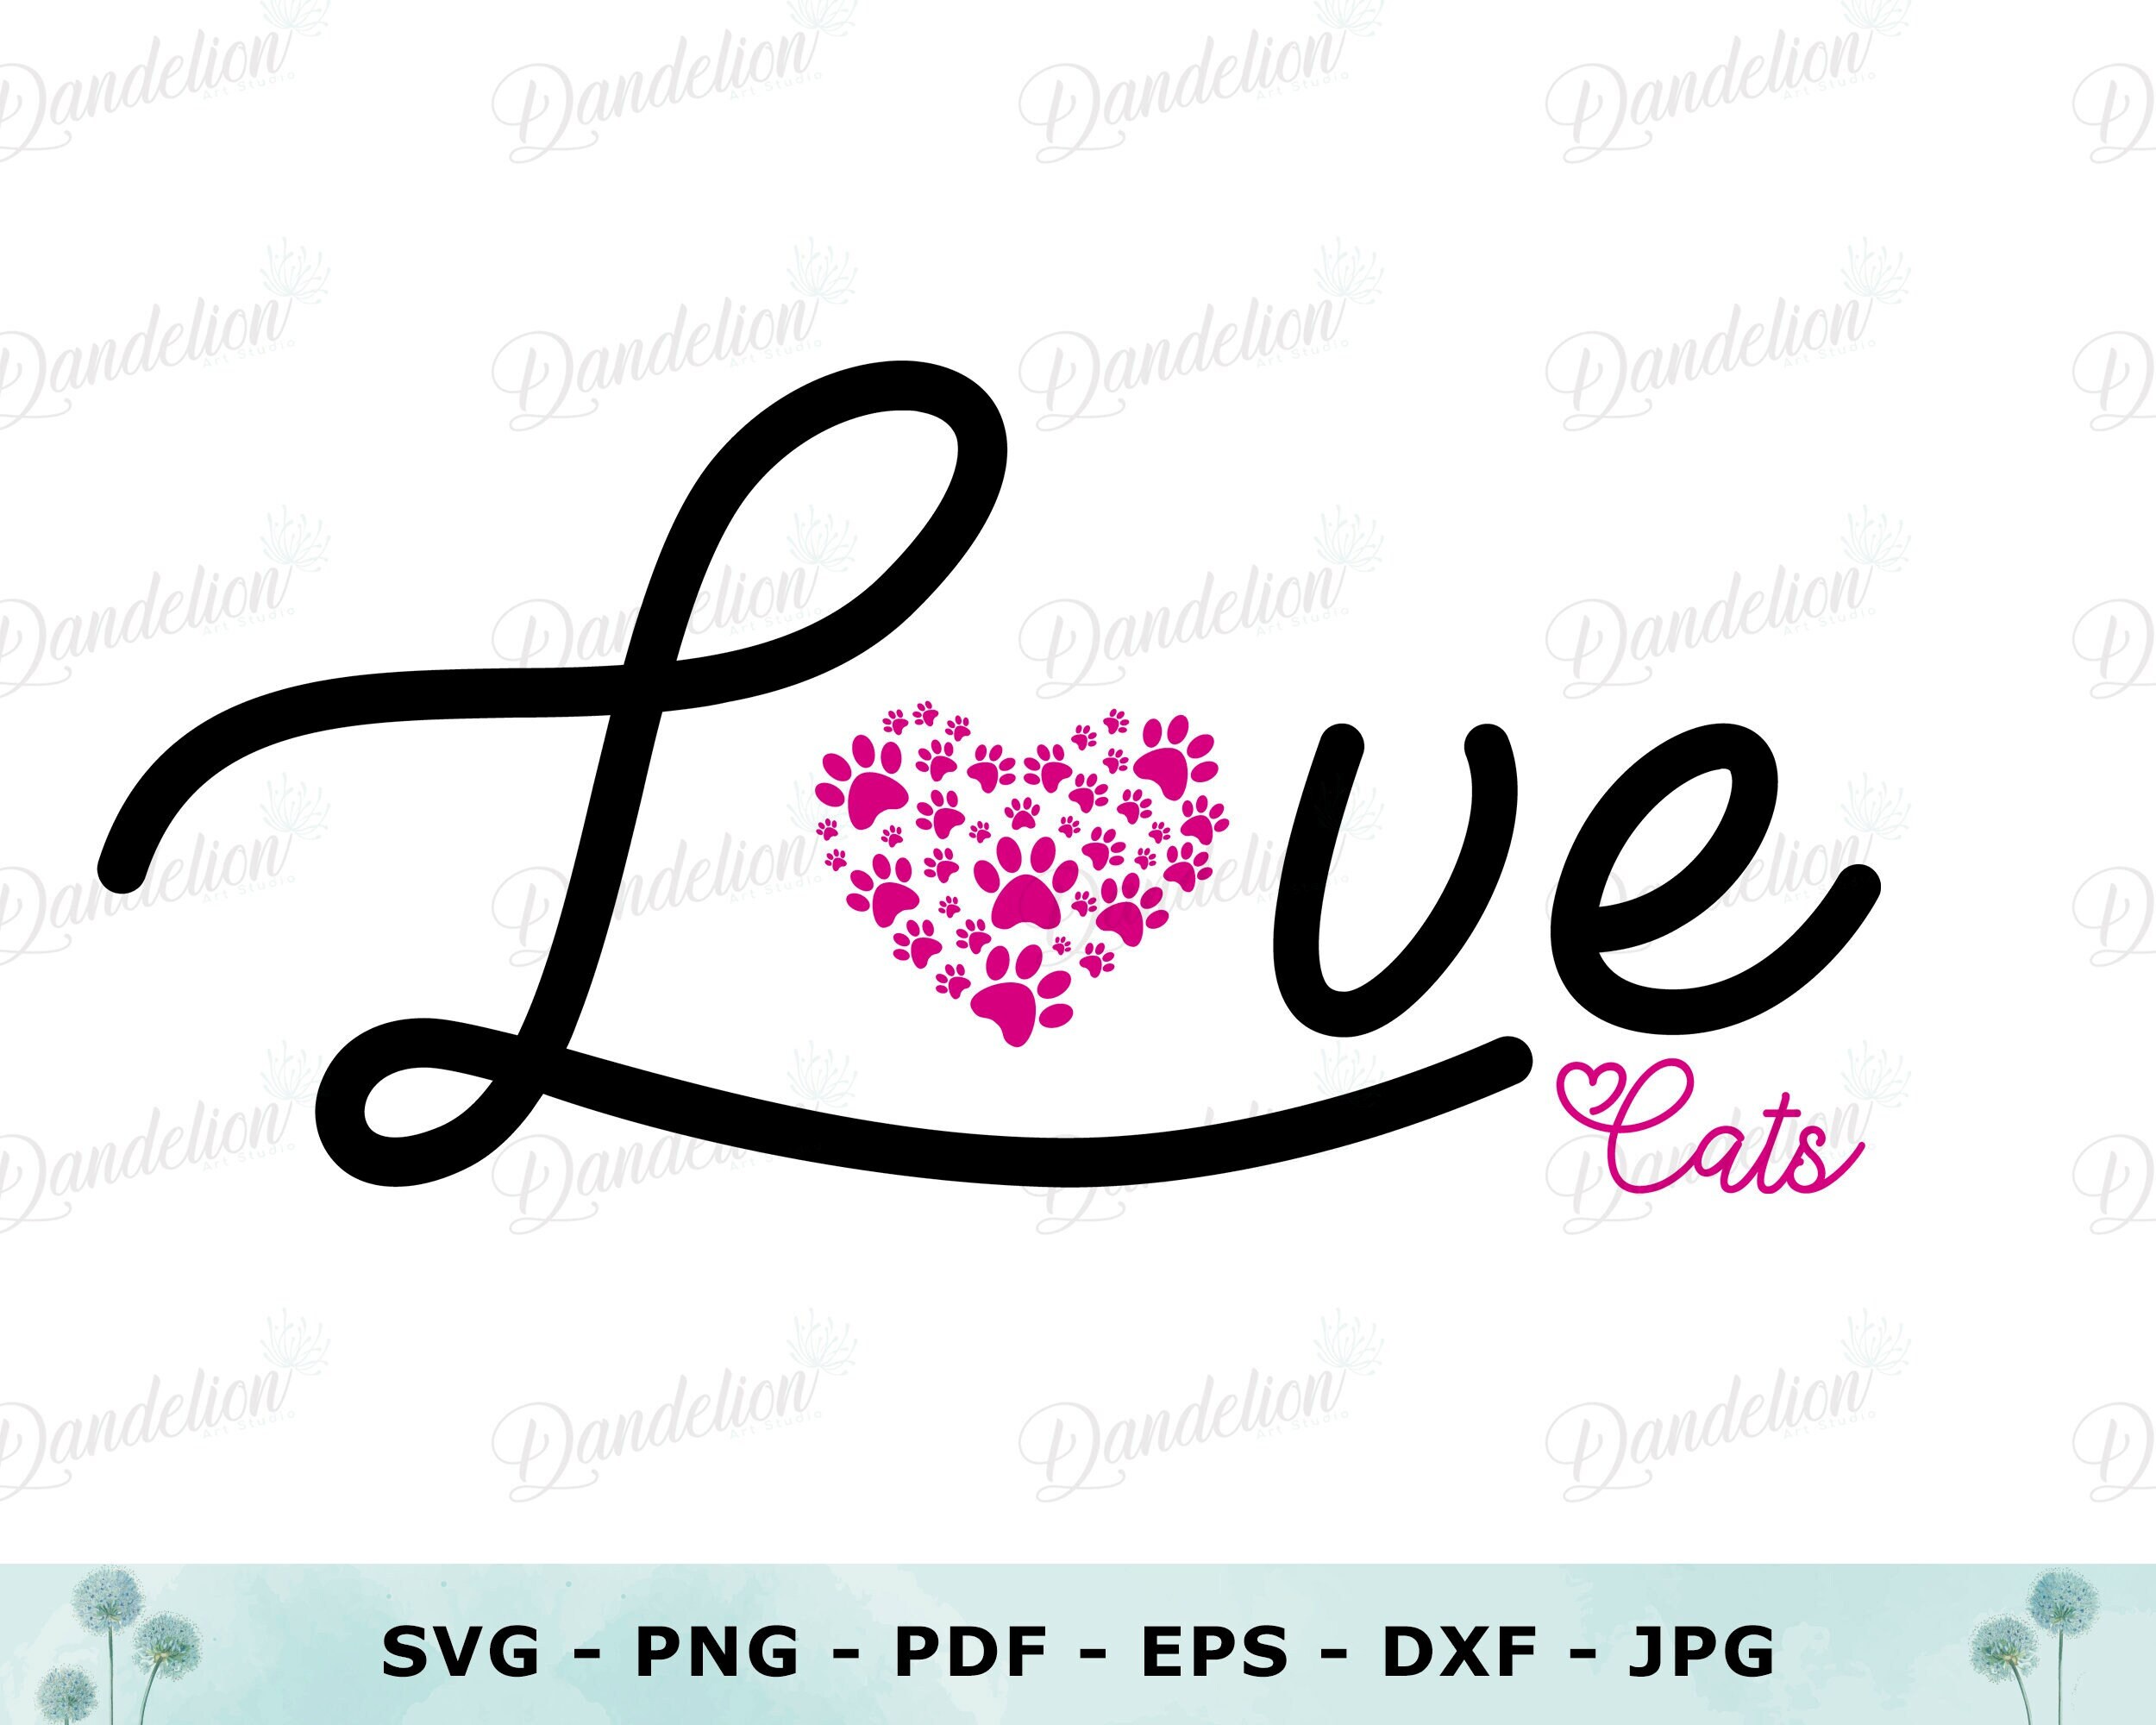 Love Cats SVG -  Cat Lover svg -  Girl Shirt -  I Love Cats -  Cute Cat Heart Love -  Cut File Cricut -  Hand-lettered quotes svg -  Gift Ideas -  Download